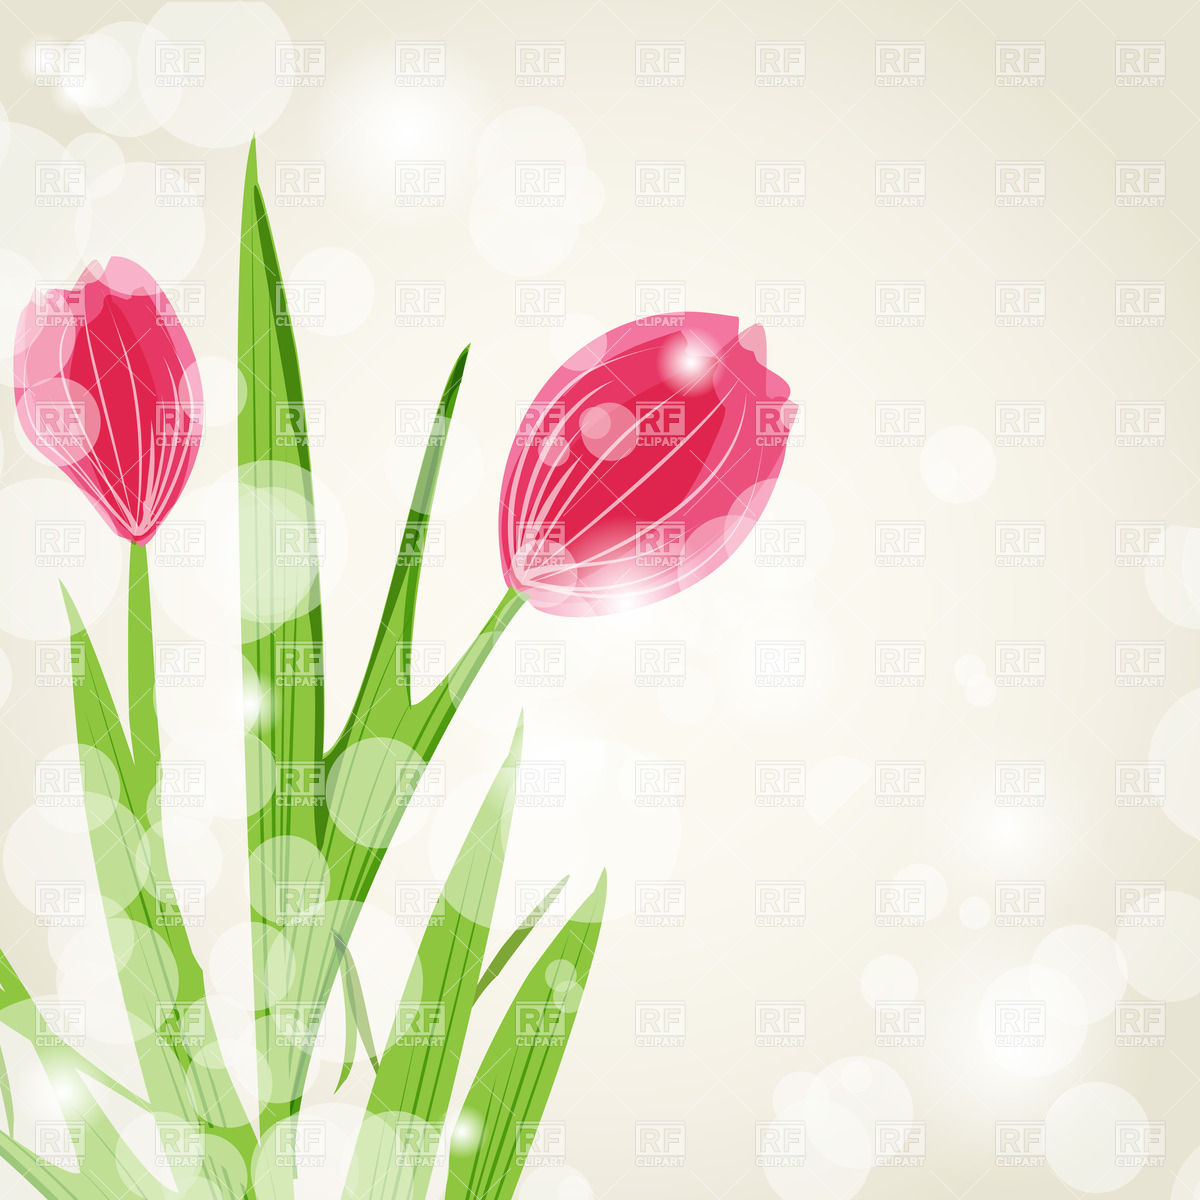 Tulips   Flowers And Light Stains Download Royalty Free Vector